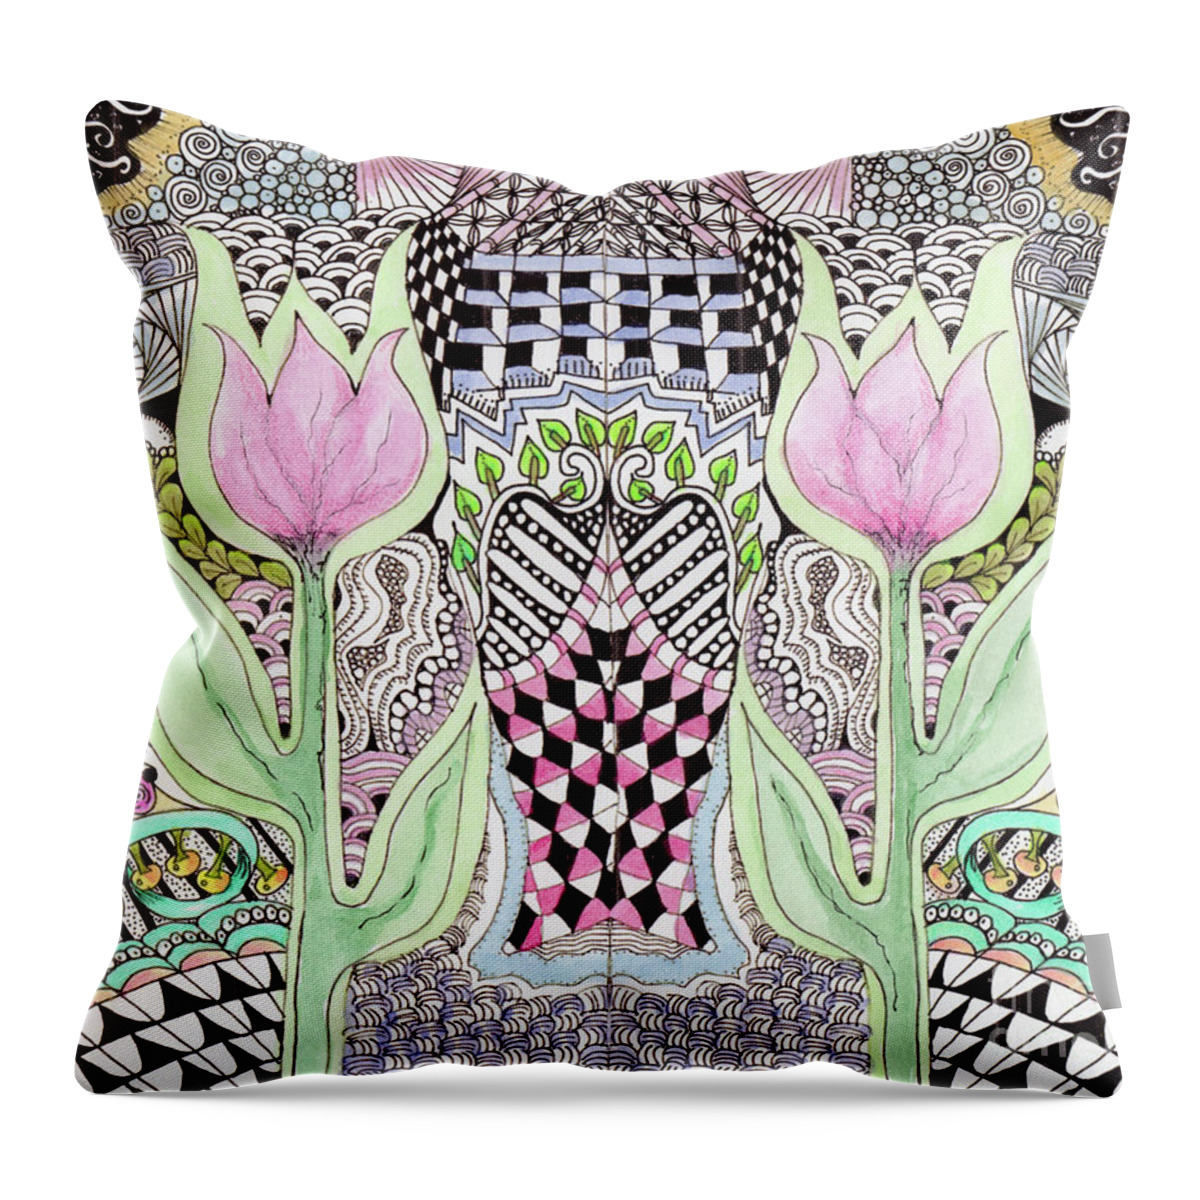 Tulips Flowers Watercolors Pen And Ink Zentangle Designs Throw Pillow featuring the painting Two Tulips by Ruth Dailey